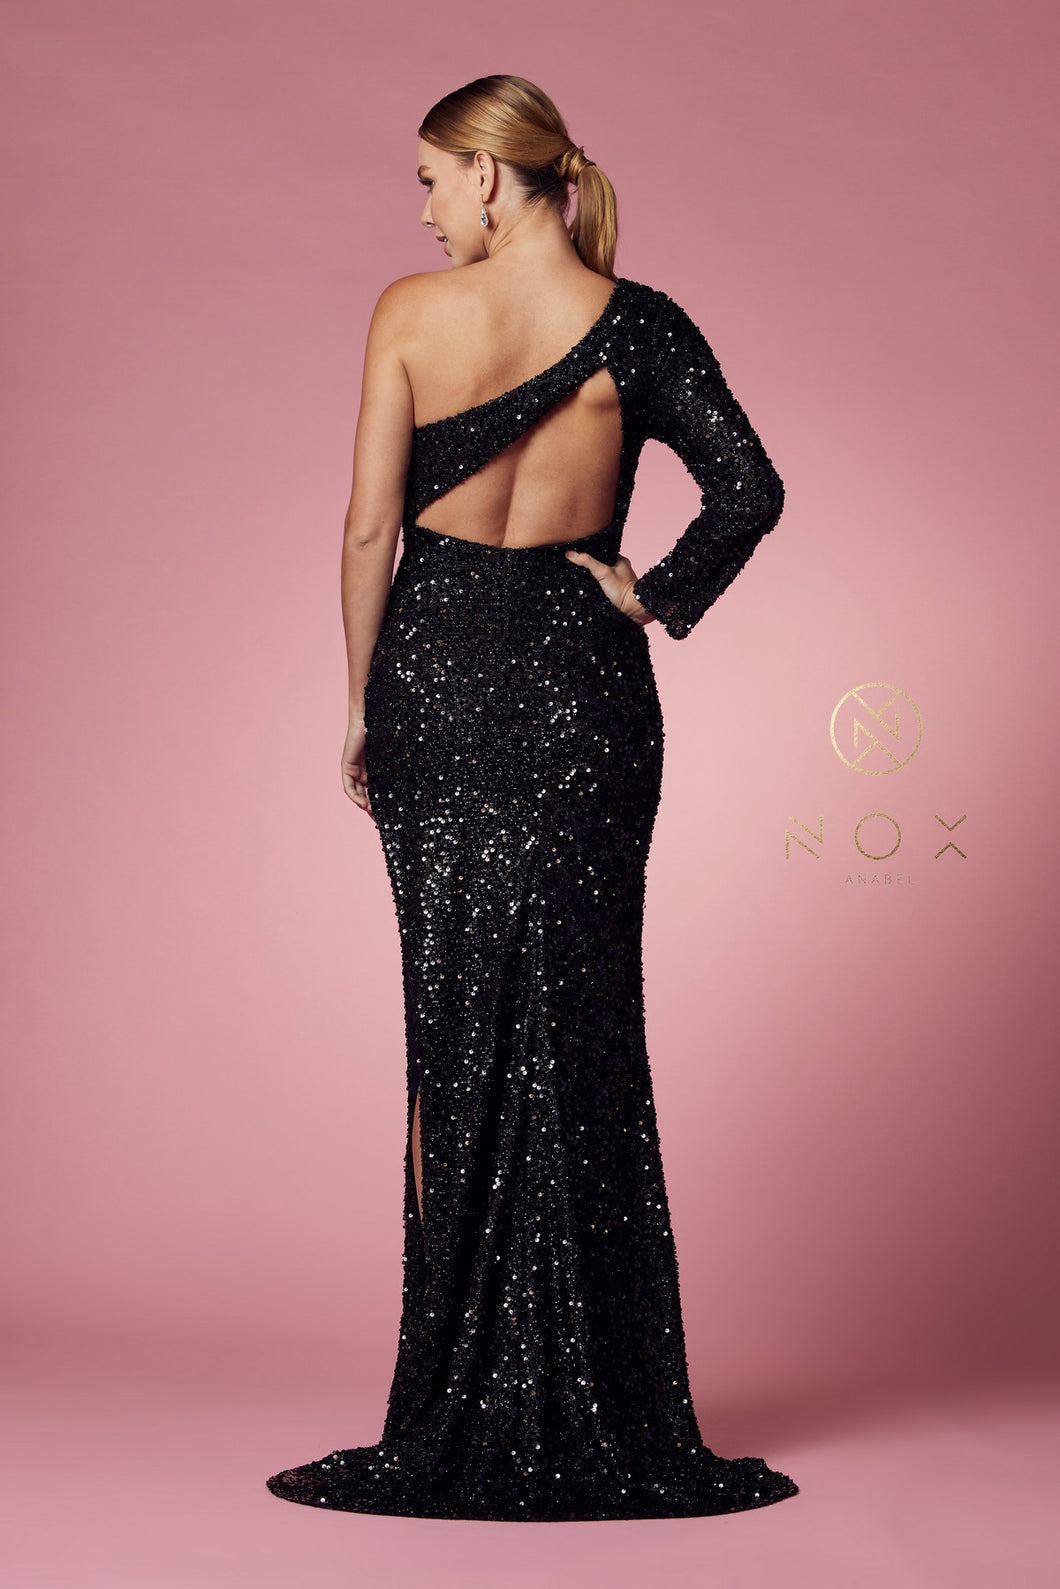 N S1013 - Full Sequins One Shoulder with Cut Out Fit & Flare Prom Gown with Open Back & Leg Slit Prom Dress Nox 2 BLACK 